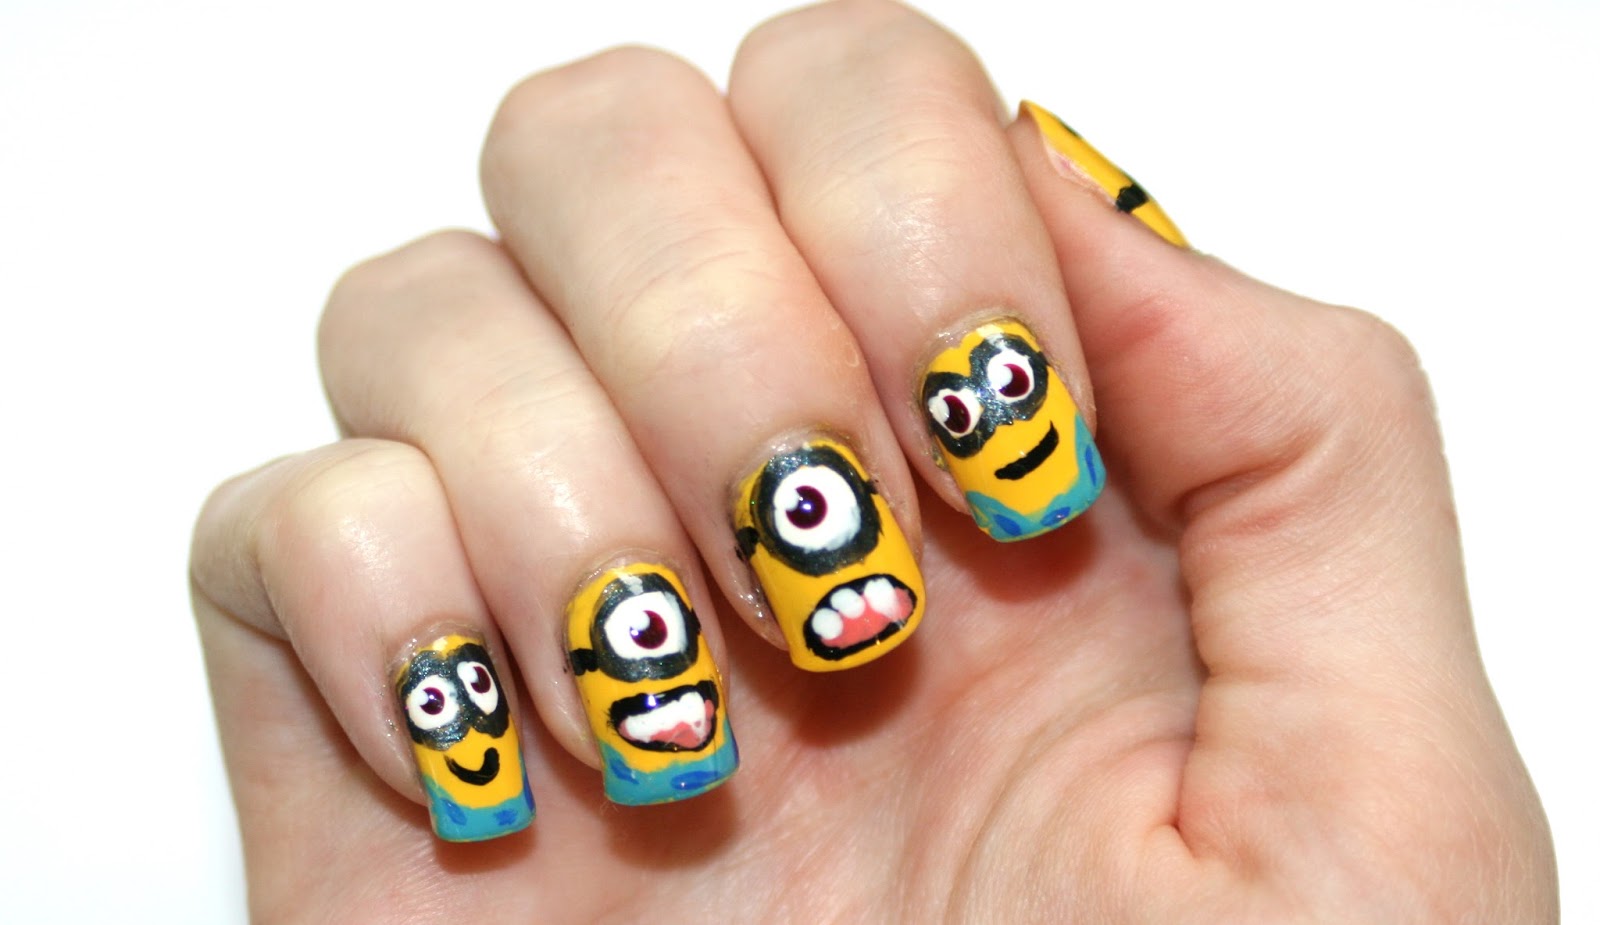 10. "Minion Nail Art with 3D Accents" by cutepolish - wide 9